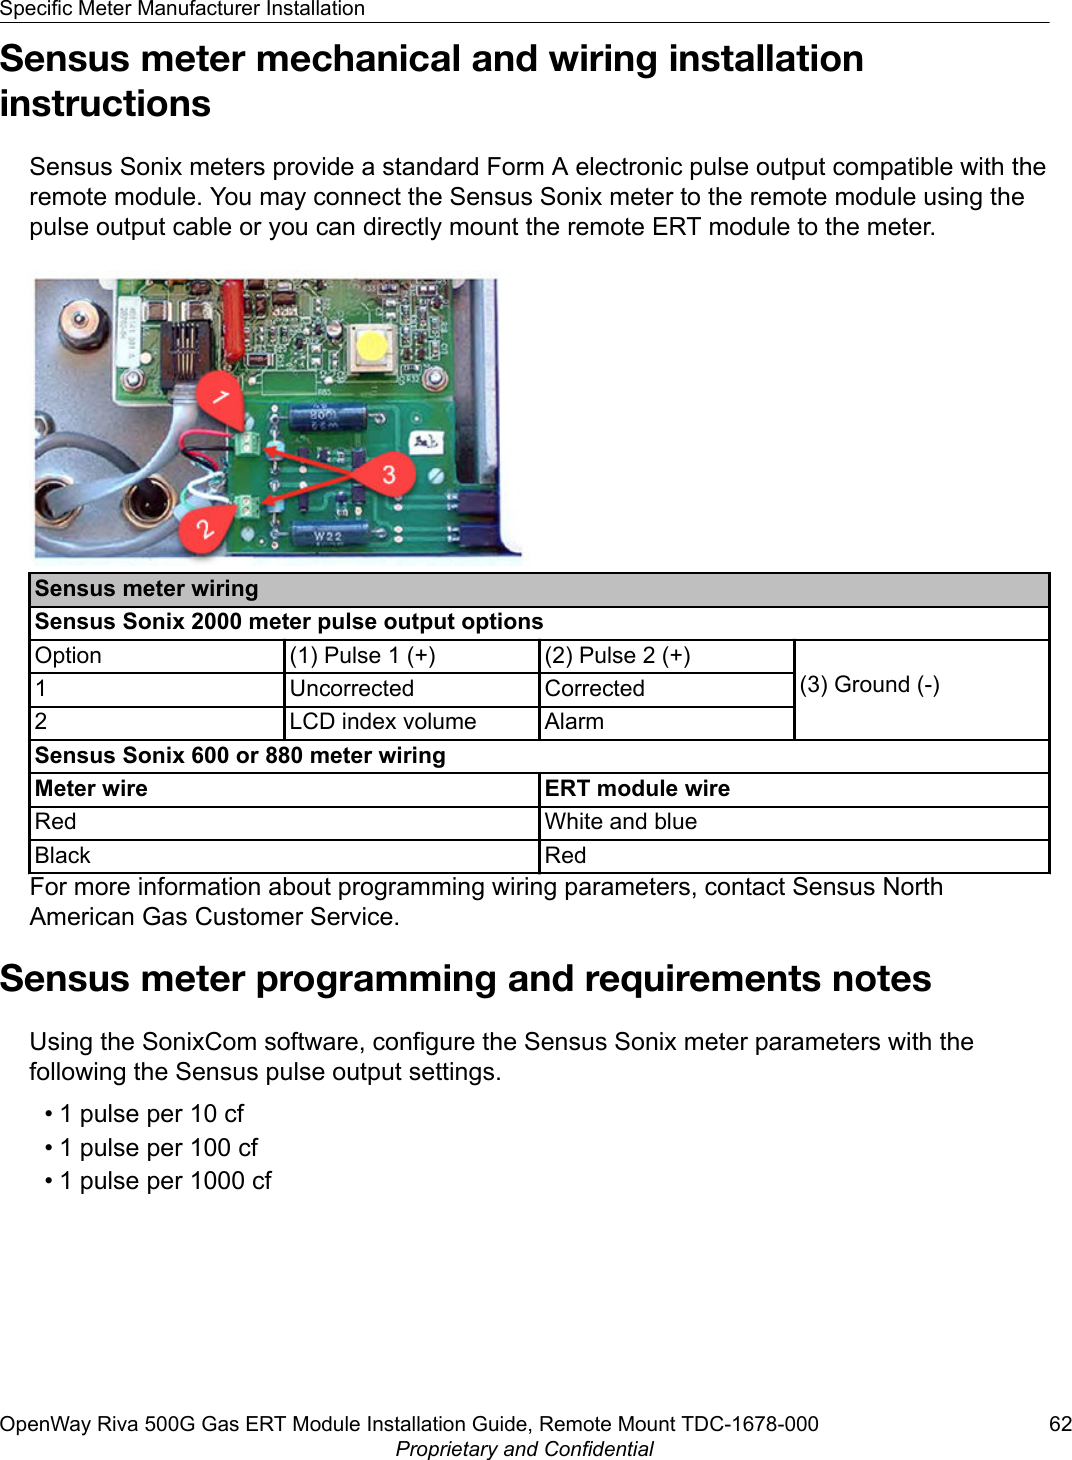 Sensus meter mechanical and wiring installationinstructionsSensus Sonix meters provide a standard Form A electronic pulse output compatible with theremote module. You may connect the Sensus Sonix meter to the remote module using thepulse output cable or you can directly mount the remote ERT module to the meter.Sensus meter wiringSensus Sonix 2000 meter pulse output optionsOption (1) Pulse 1 (+) (2) Pulse 2 (+)(3) Ground (-)1 Uncorrected Corrected2 LCD index volume AlarmSensus Sonix 600 or 880 meter wiringMeter wire ERT module wireRed White and blueBlack RedFor more information about programming wiring parameters, contact Sensus NorthAmerican Gas Customer Service.Sensus meter programming and requirements notesUsing the SonixCom software, configure the Sensus Sonix meter parameters with thefollowing the Sensus pulse output settings.• 1 pulse per 10 cf• 1 pulse per 100 cf• 1 pulse per 1000 cfSpecific Meter Manufacturer InstallationOpenWay Riva 500G Gas ERT Module Installation Guide, Remote Mount TDC-1678-000 62Proprietary and Confidential